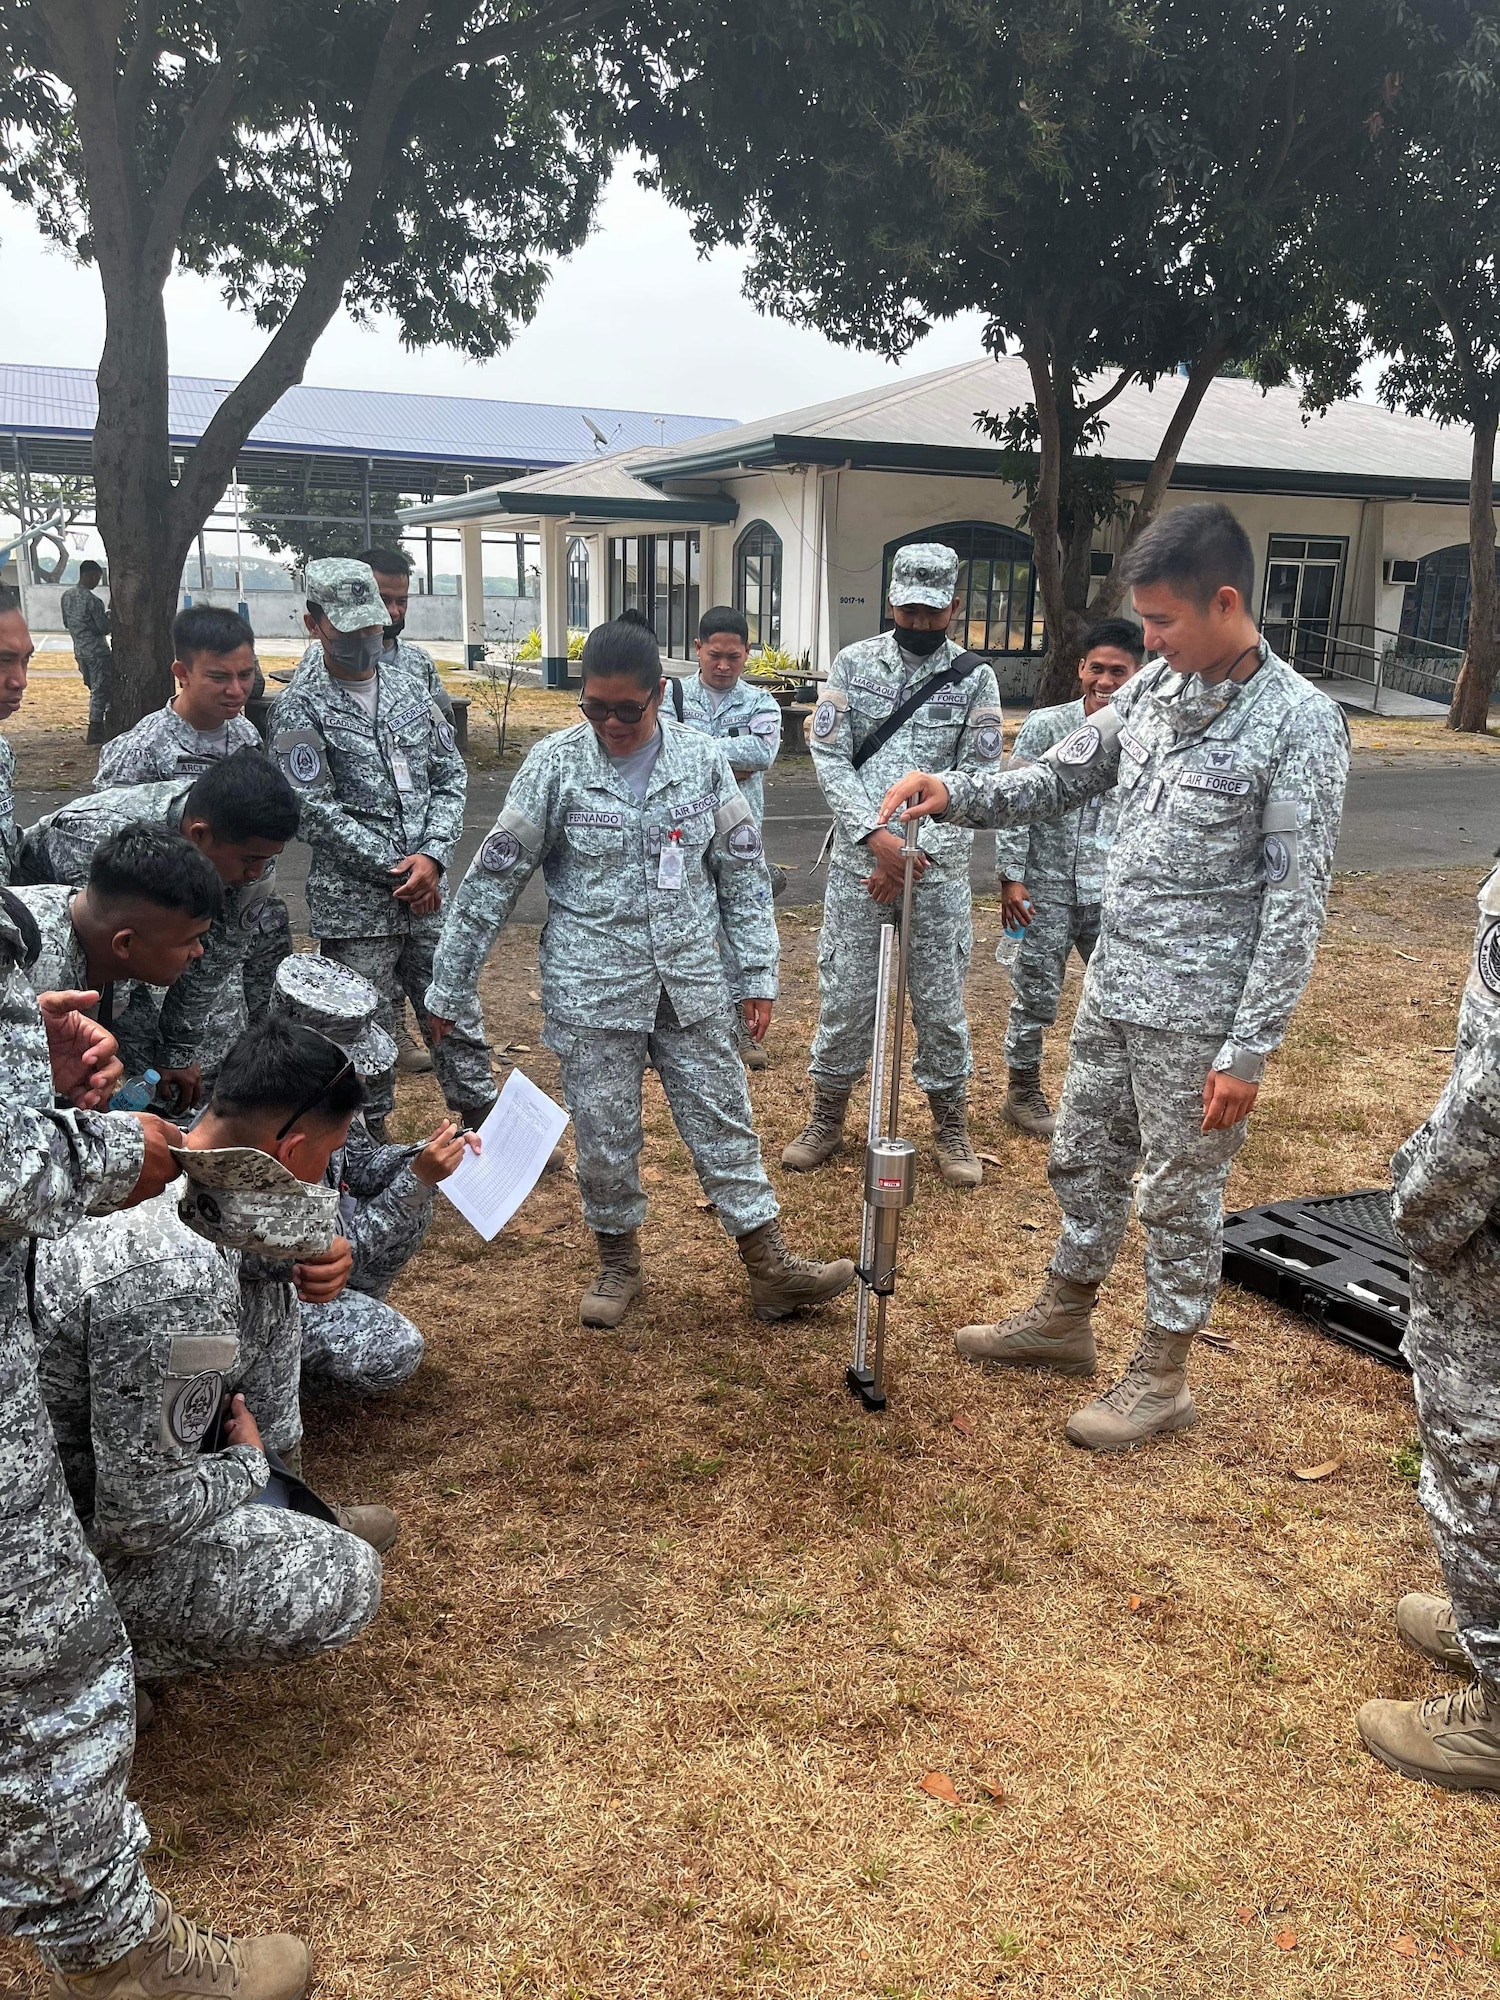 Philippine air force members with the 355th Aviation Engineer Wing demonstrate the use of a dynamic cone penetrometer during a subject matter expert exchange with the with the 18th Civil Engineer Group in the Philippines, Apr 12, 2023. The SME exchange event allowed members of the 18th Wing’s 18th CEG and PAF 355th AEW to share techniques and procedures on airfield damage repair. (Courtesy photo from Philippine air force public affairs)